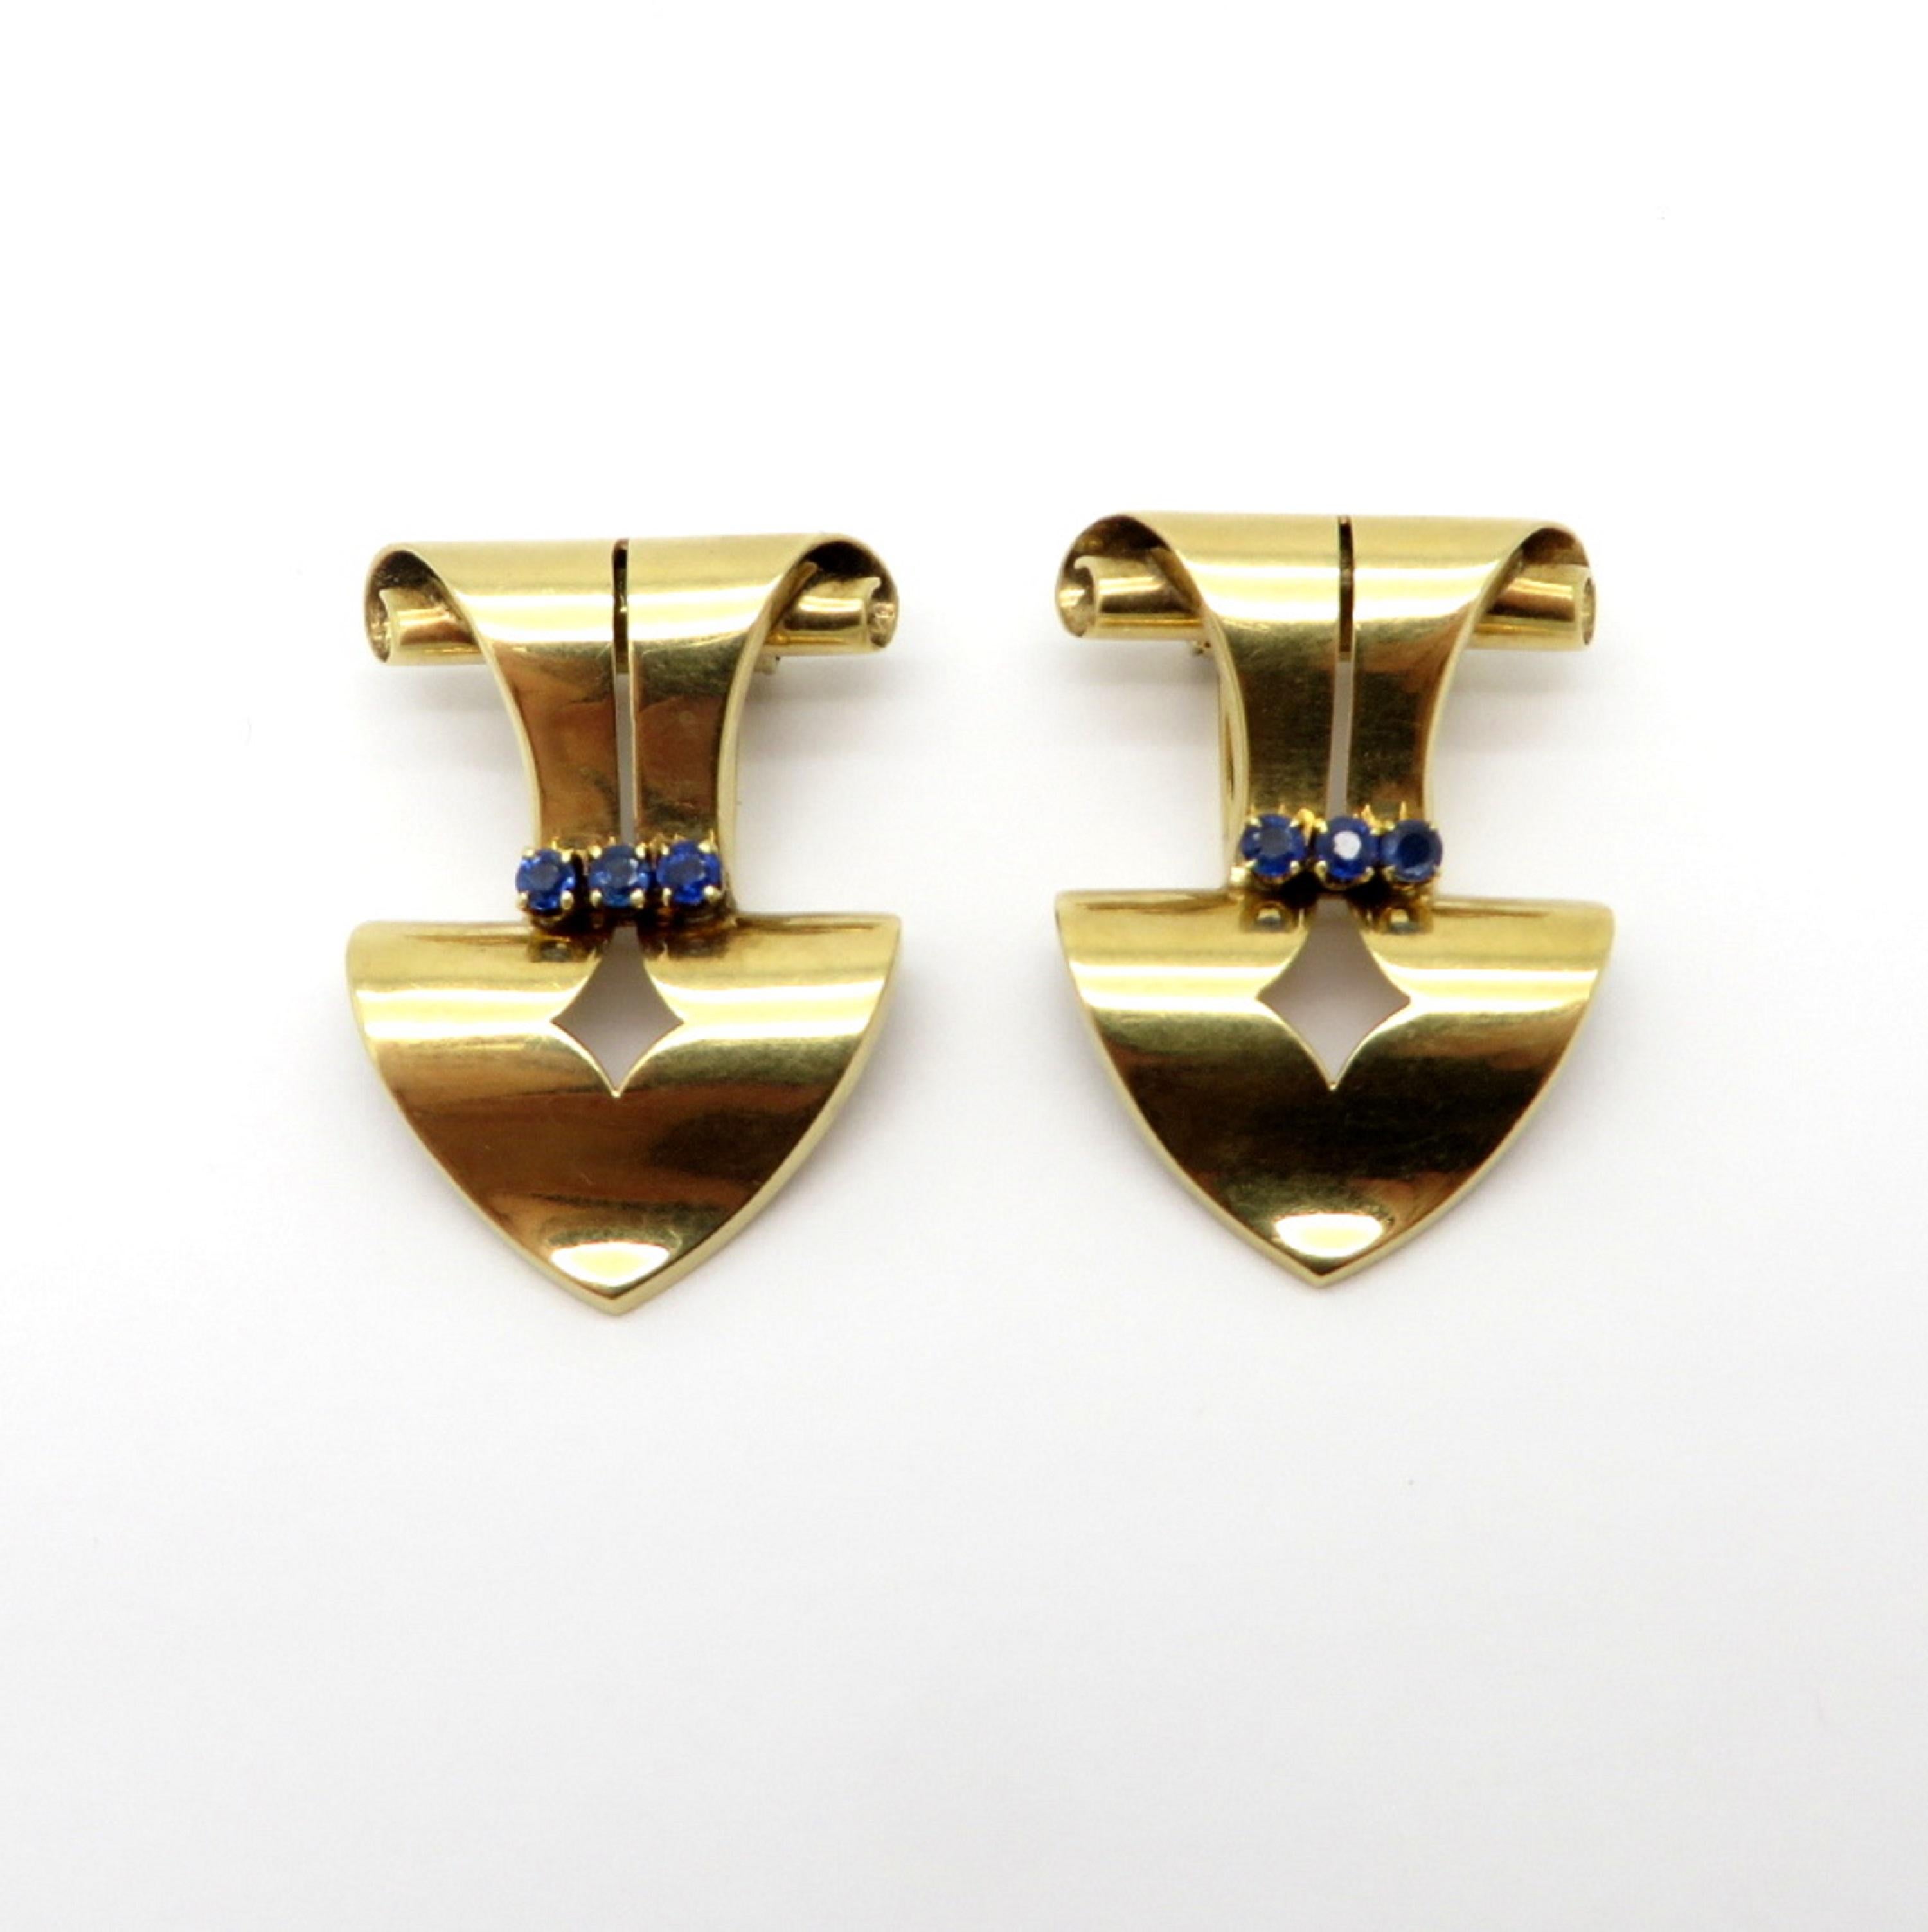 Designer Tiffany & Co. 14K yellow gold sapphire cufflink clips. Showcasing six round brilliant cut sapphires, four prong crown set, measuring 2.8 mm each. Includes a Tiffany & Co. box. Each clip measures 1.5” inches x 1” inch. The total net weight